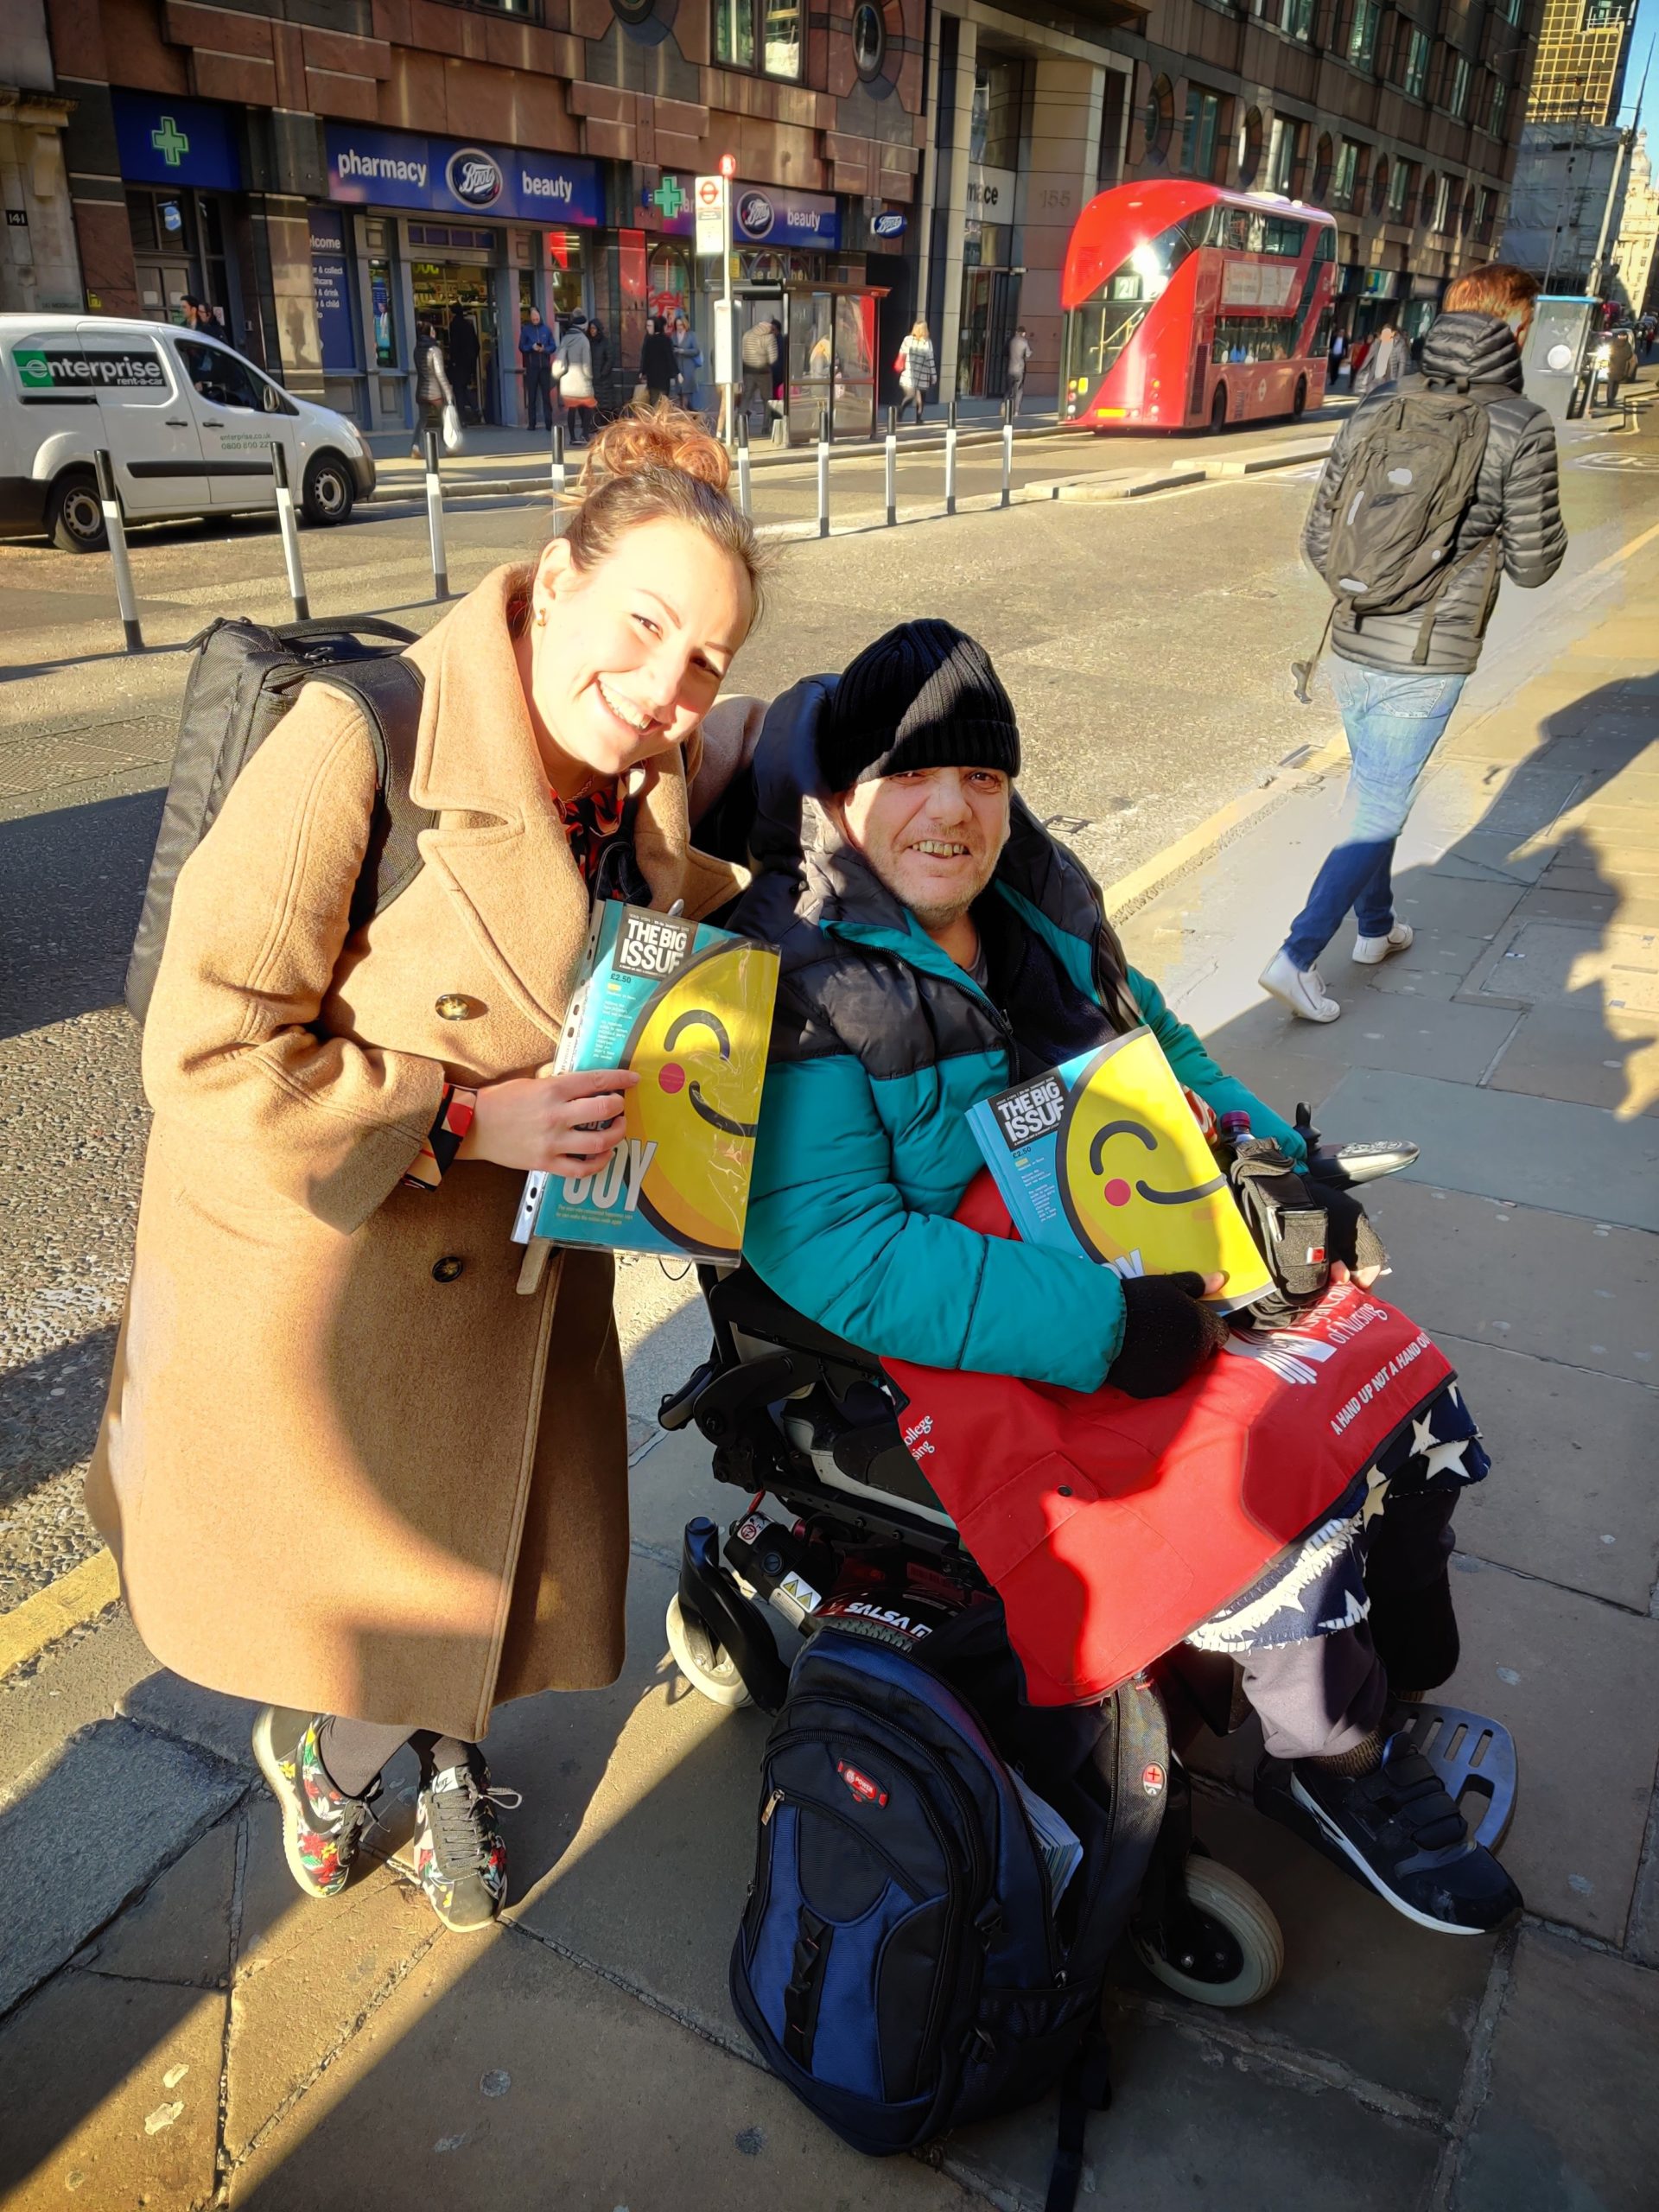 Liz smiles with Jason, one of the sellers of The Big Issue.